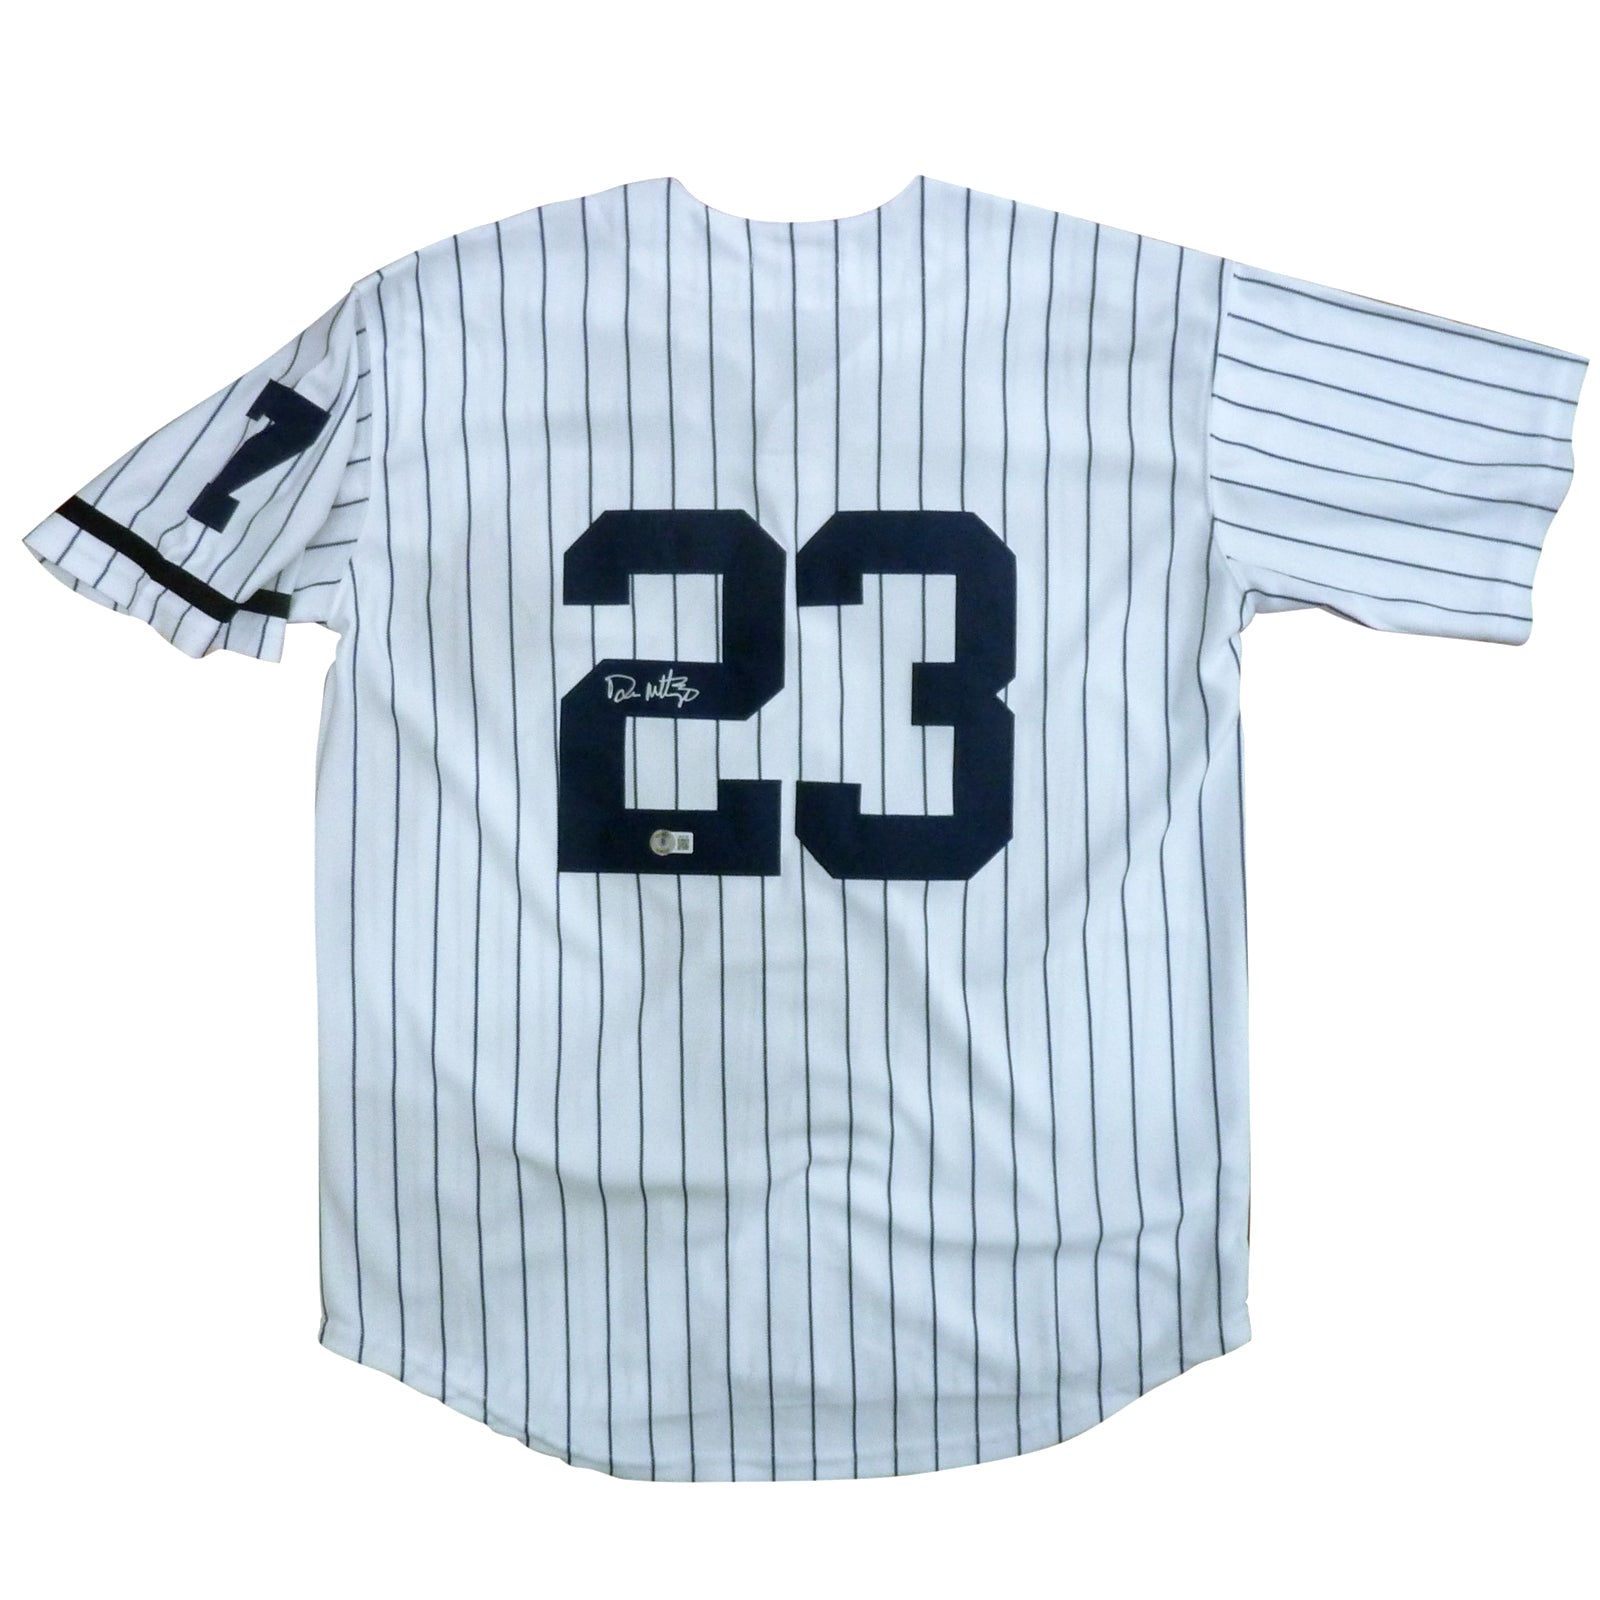 Orioles-Astros yankees mlb jersey mitchell ness series preview